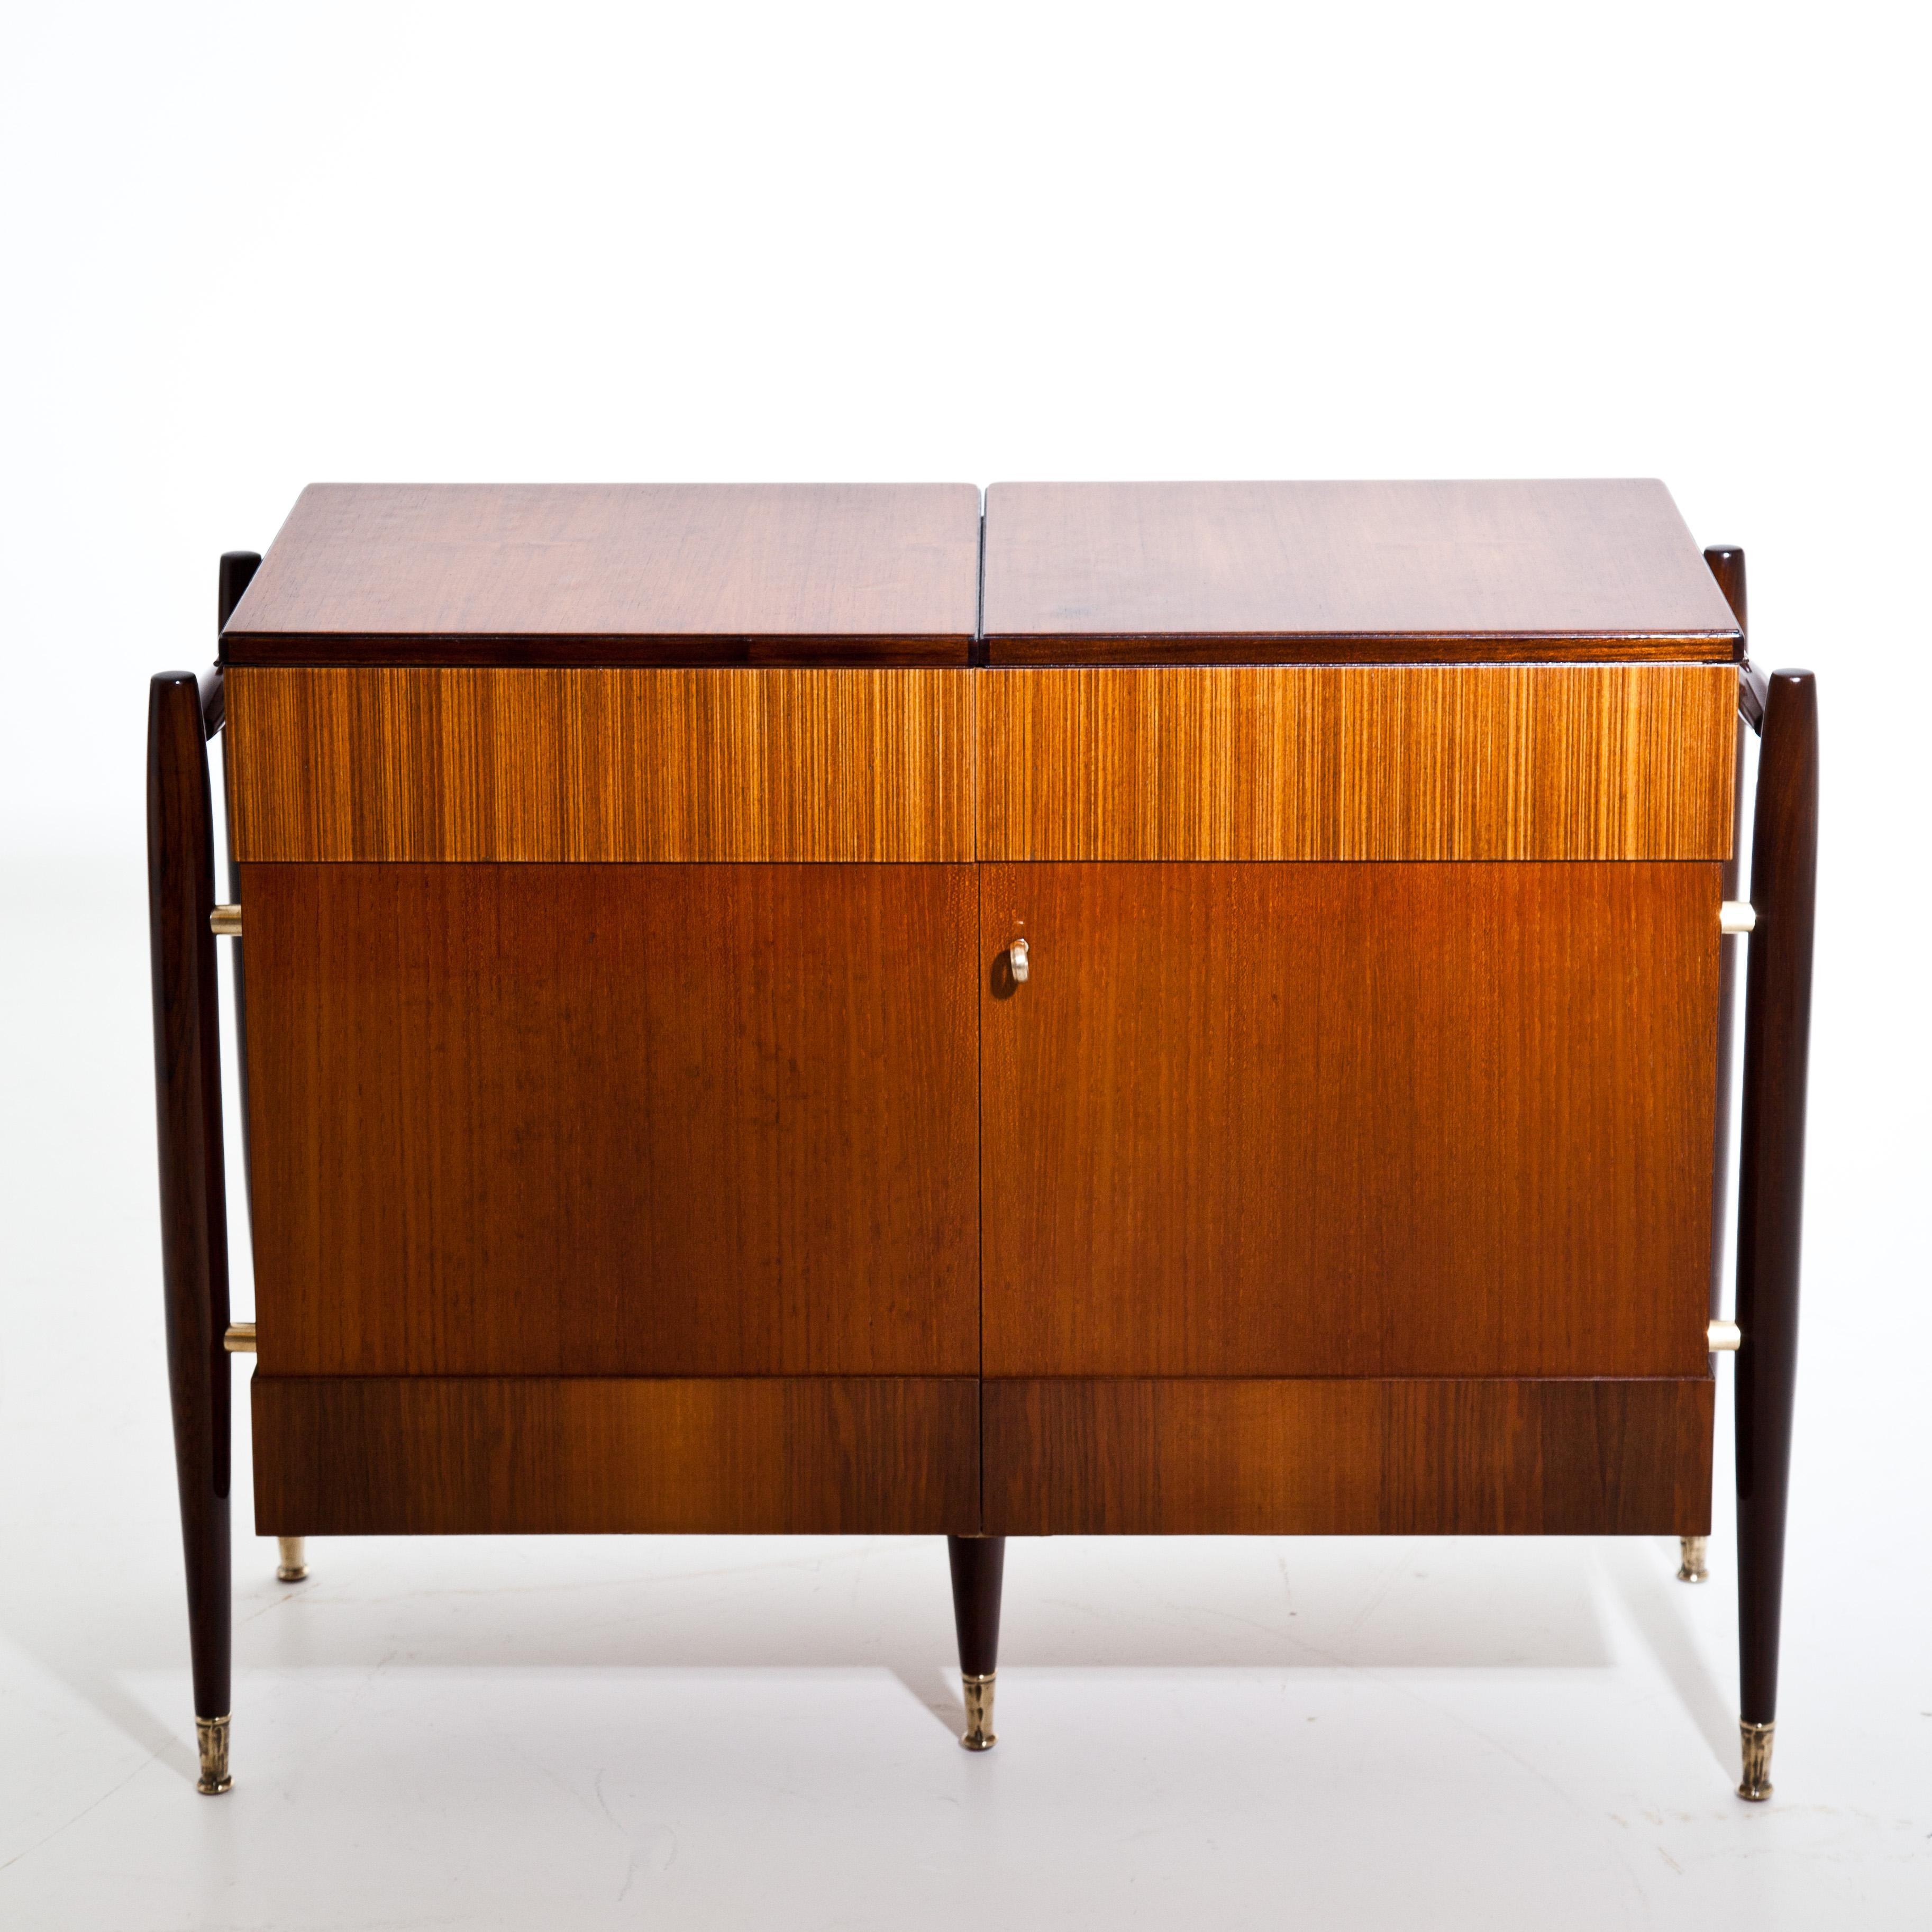 An Italian modernist folding bar cabinet. Bar folds open in the middle and is finished on all sides to be free standing. Mahogany, teak, patinated brass details.